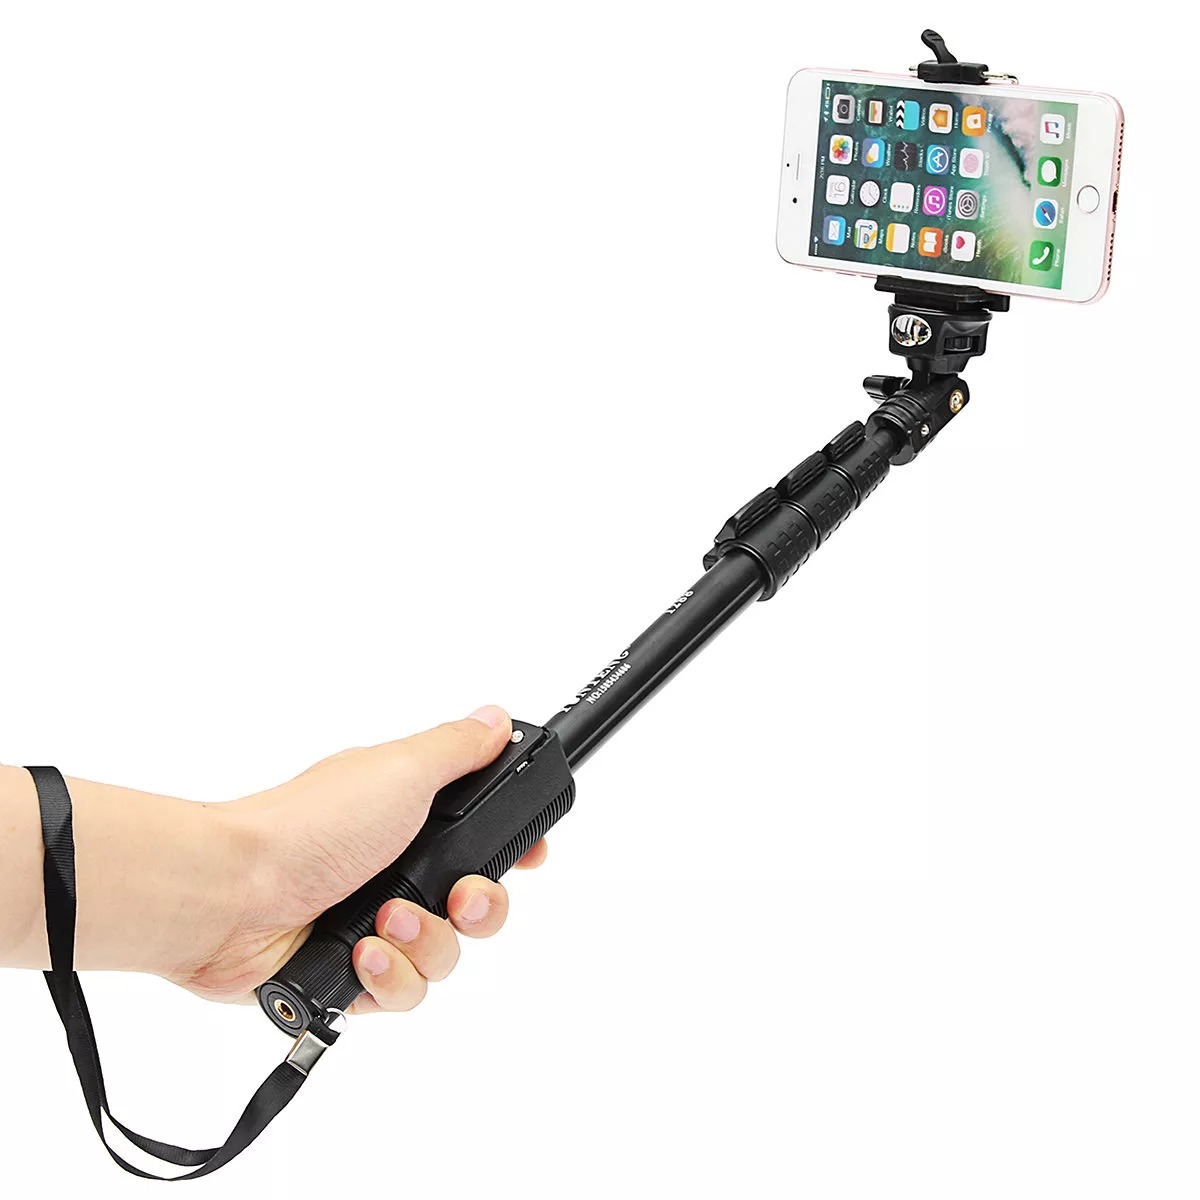 charging-your-monopod-selfie-stick-a-users-guide